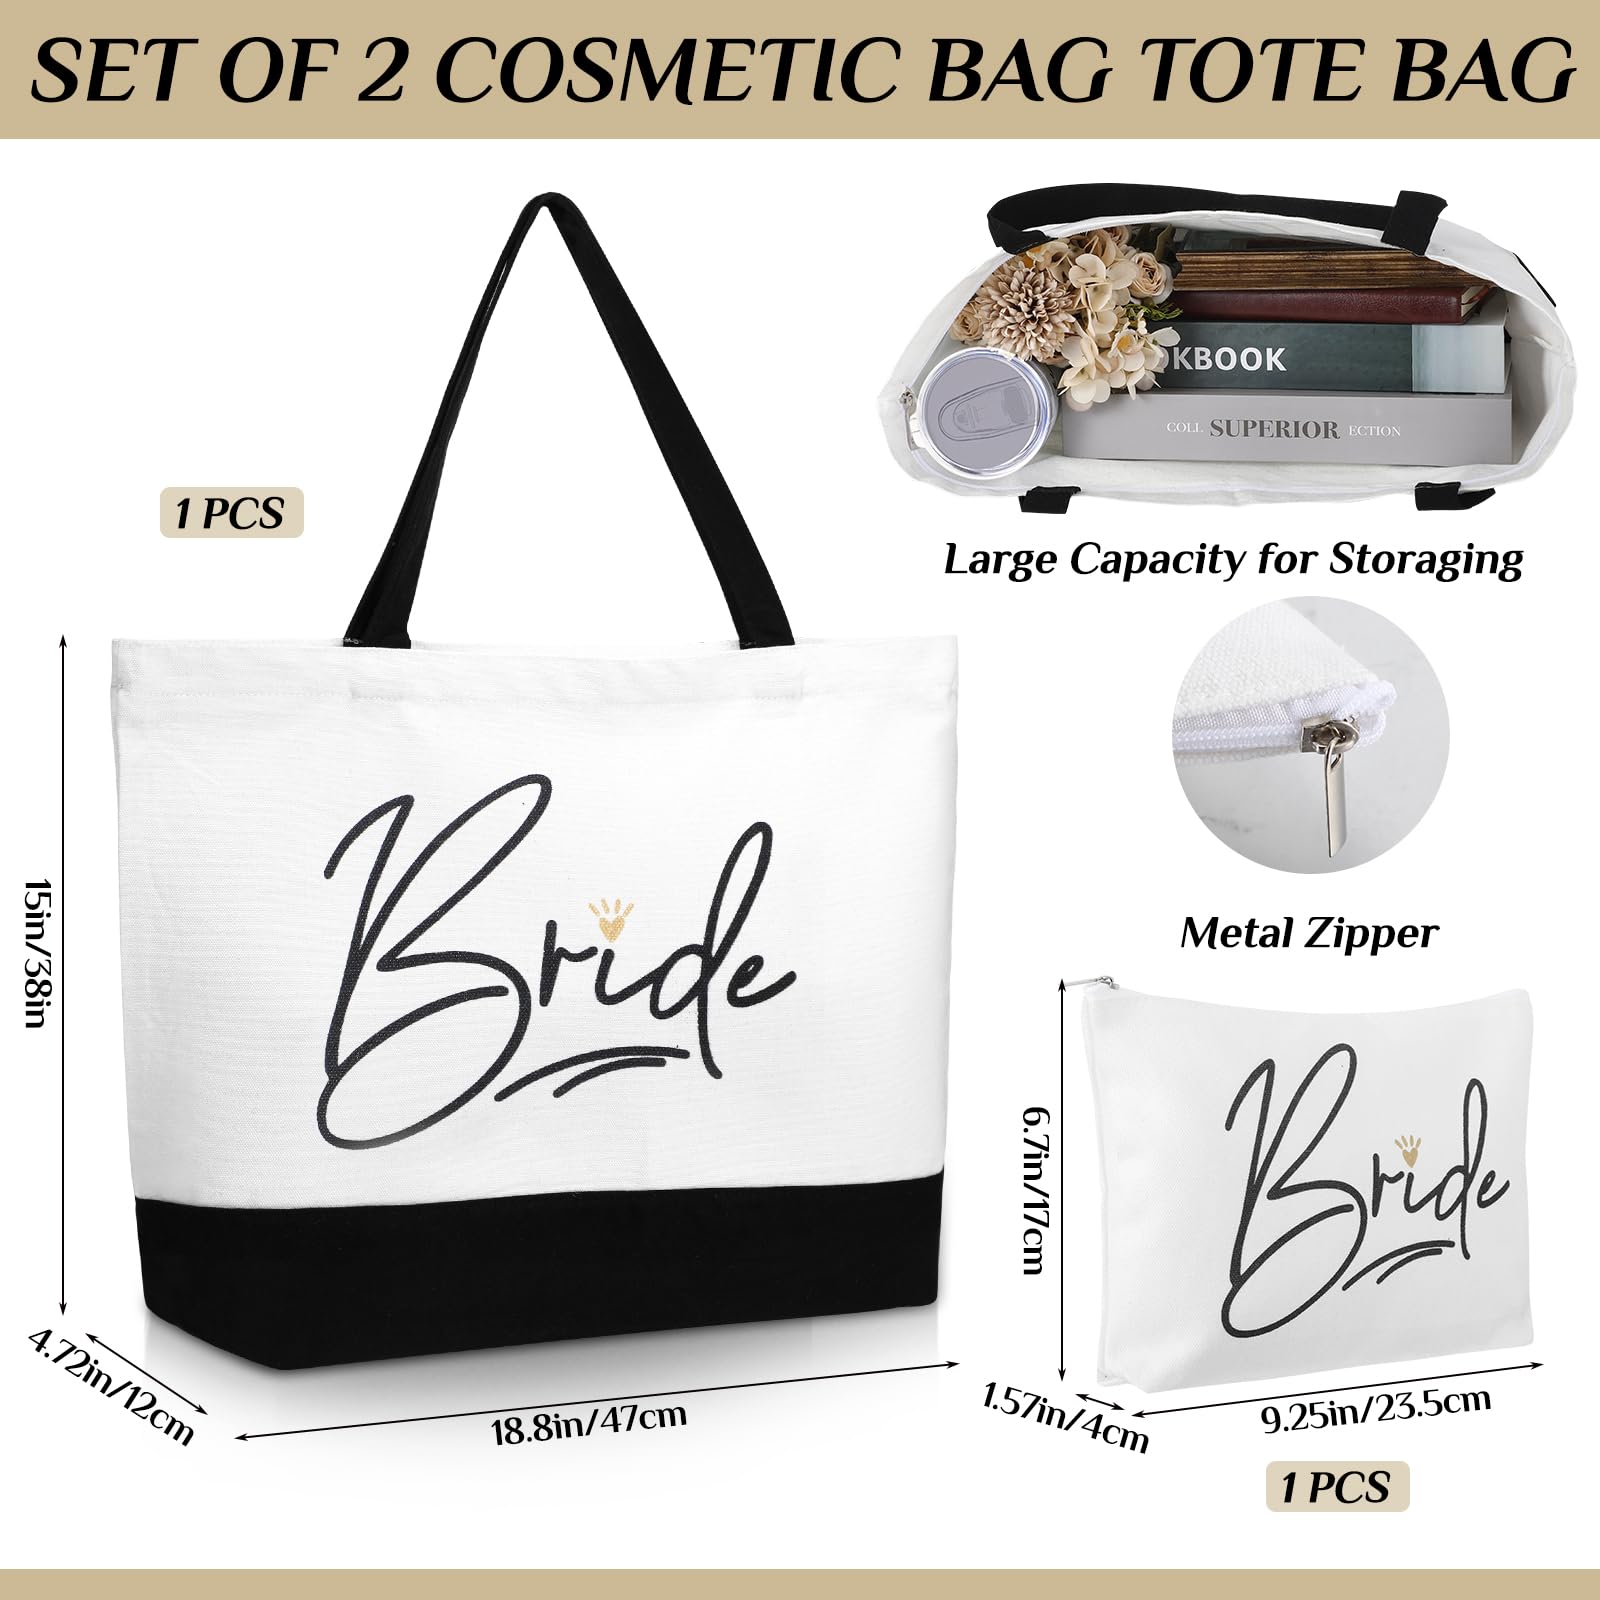 3 Pieces Bride Gifts 12oz Bride Tumbler Cup Stainless Steel Drink Cup with Straw Brush Bride Makeup Cosmetic Bag and Tote Bag for Wedding Bachelorette Bridal Shower Engagement Party Favors